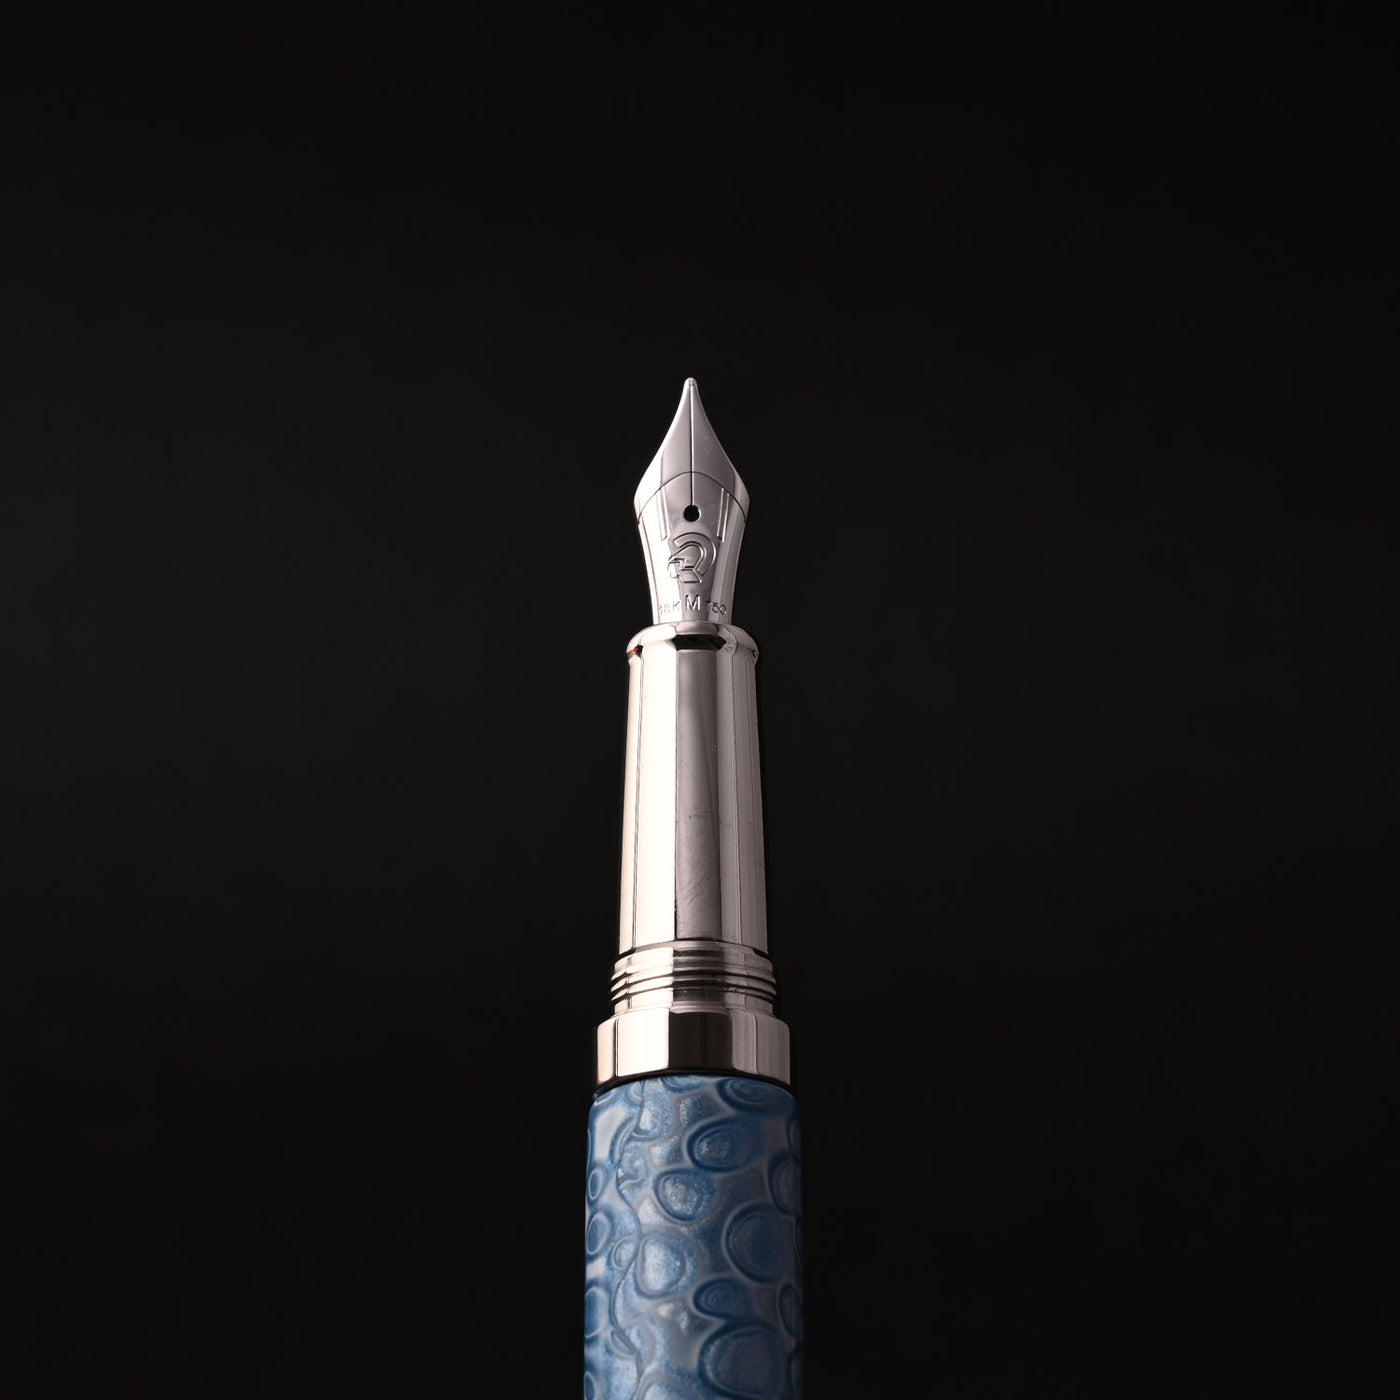 Staedtler Premium Pen of the Season Fountain Pen - Blue CT (Limited Edition) 6